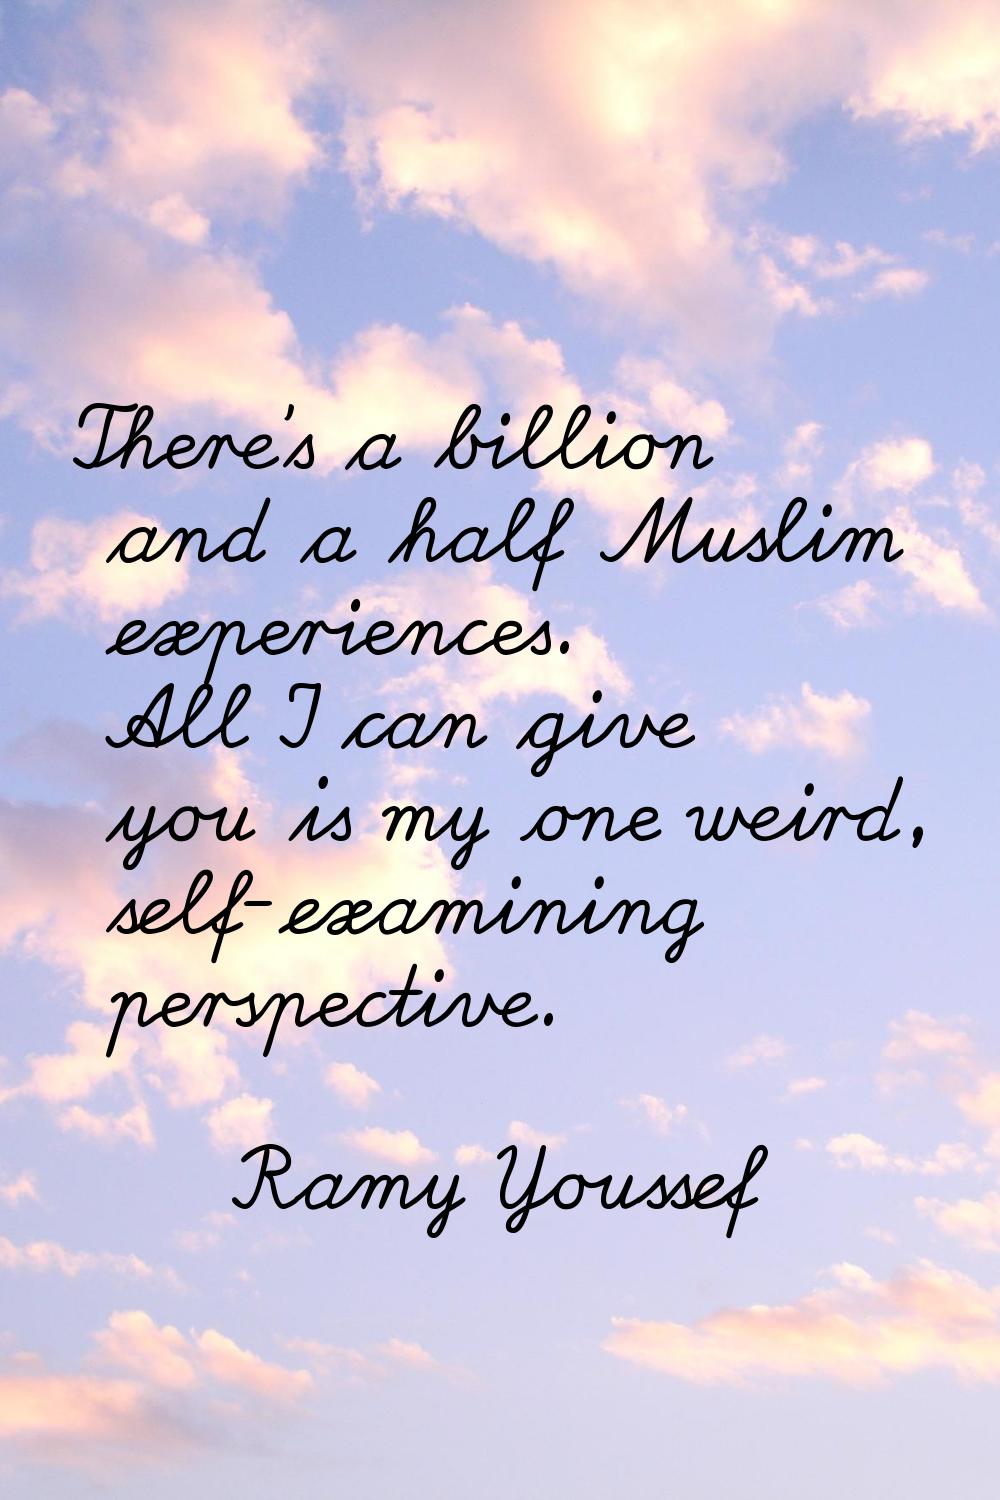 There's a billion and a half Muslim experiences. All I can give you is my one weird, self-examining